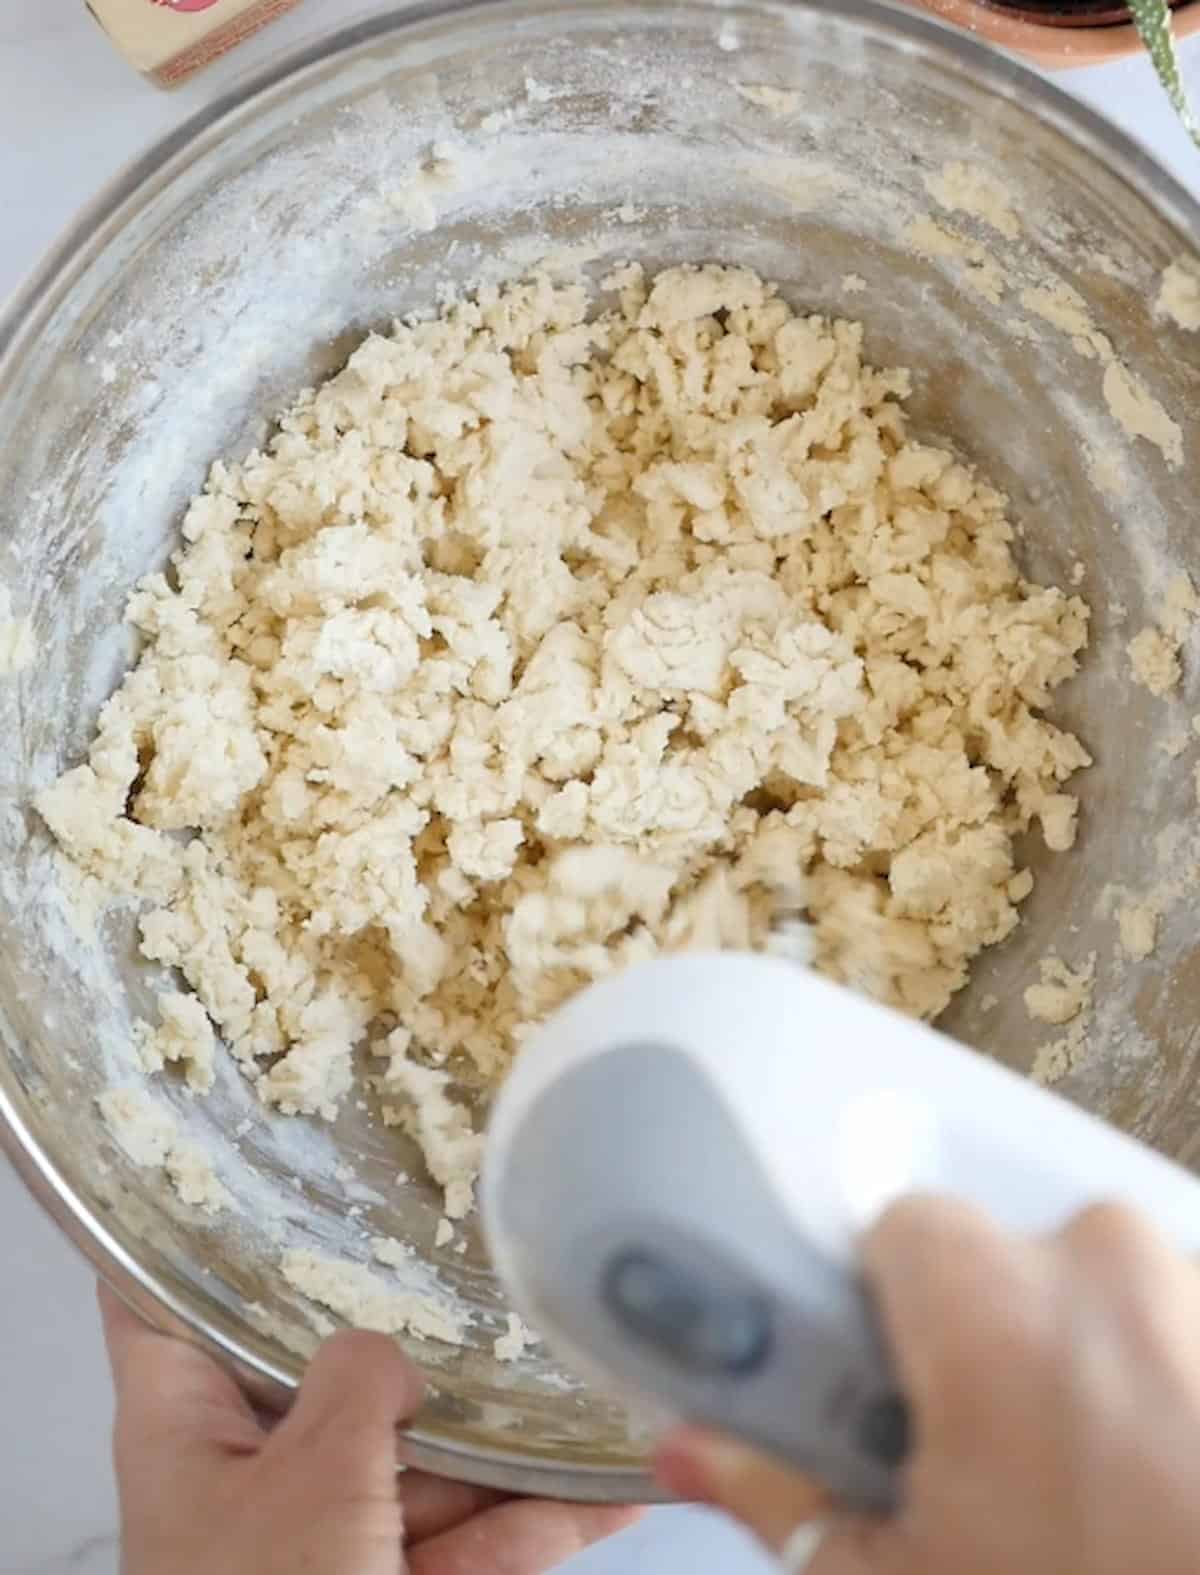 Crumbly shortbread cookie batter that is being mixed with an electric hand mixer.